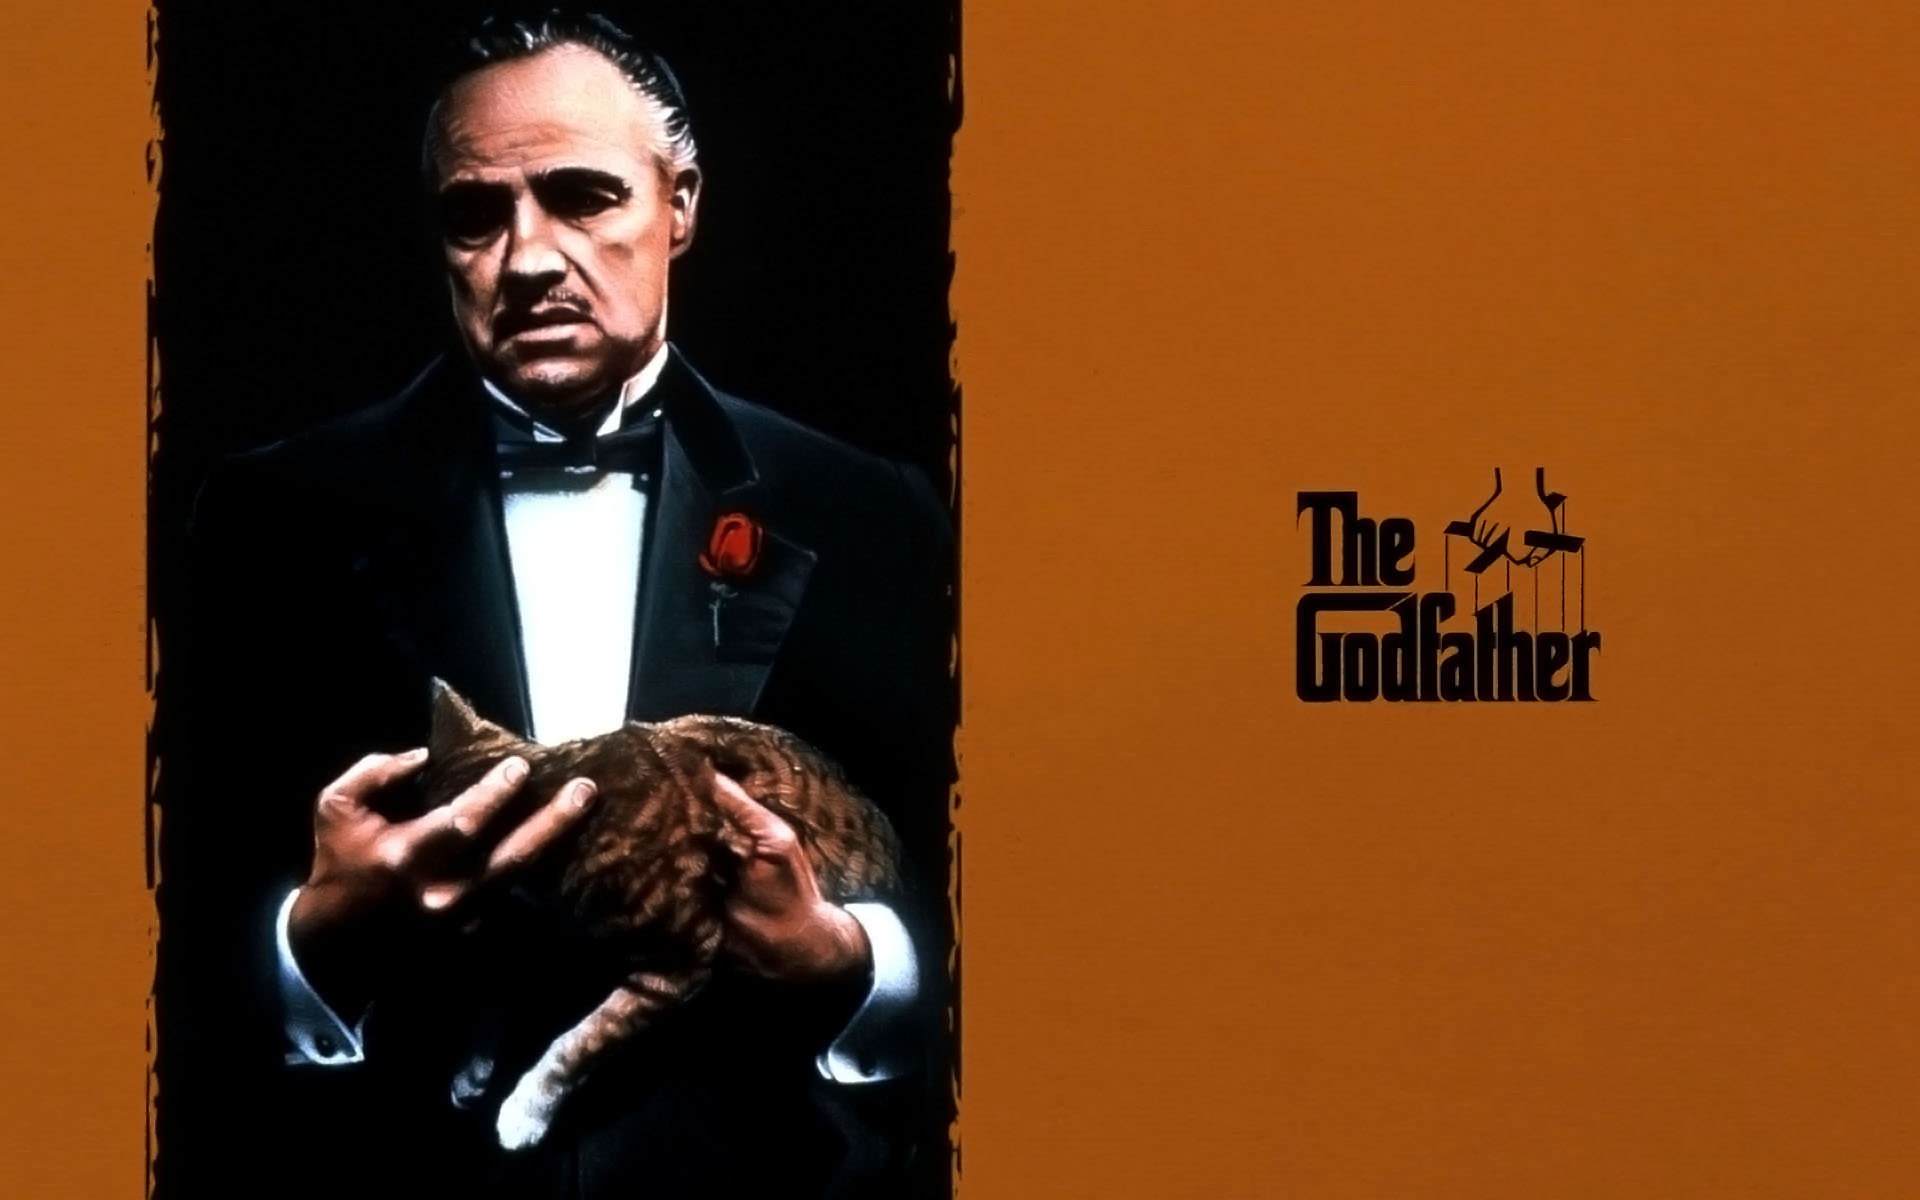 The Godfather Full HD Widescreen Wallpaper For